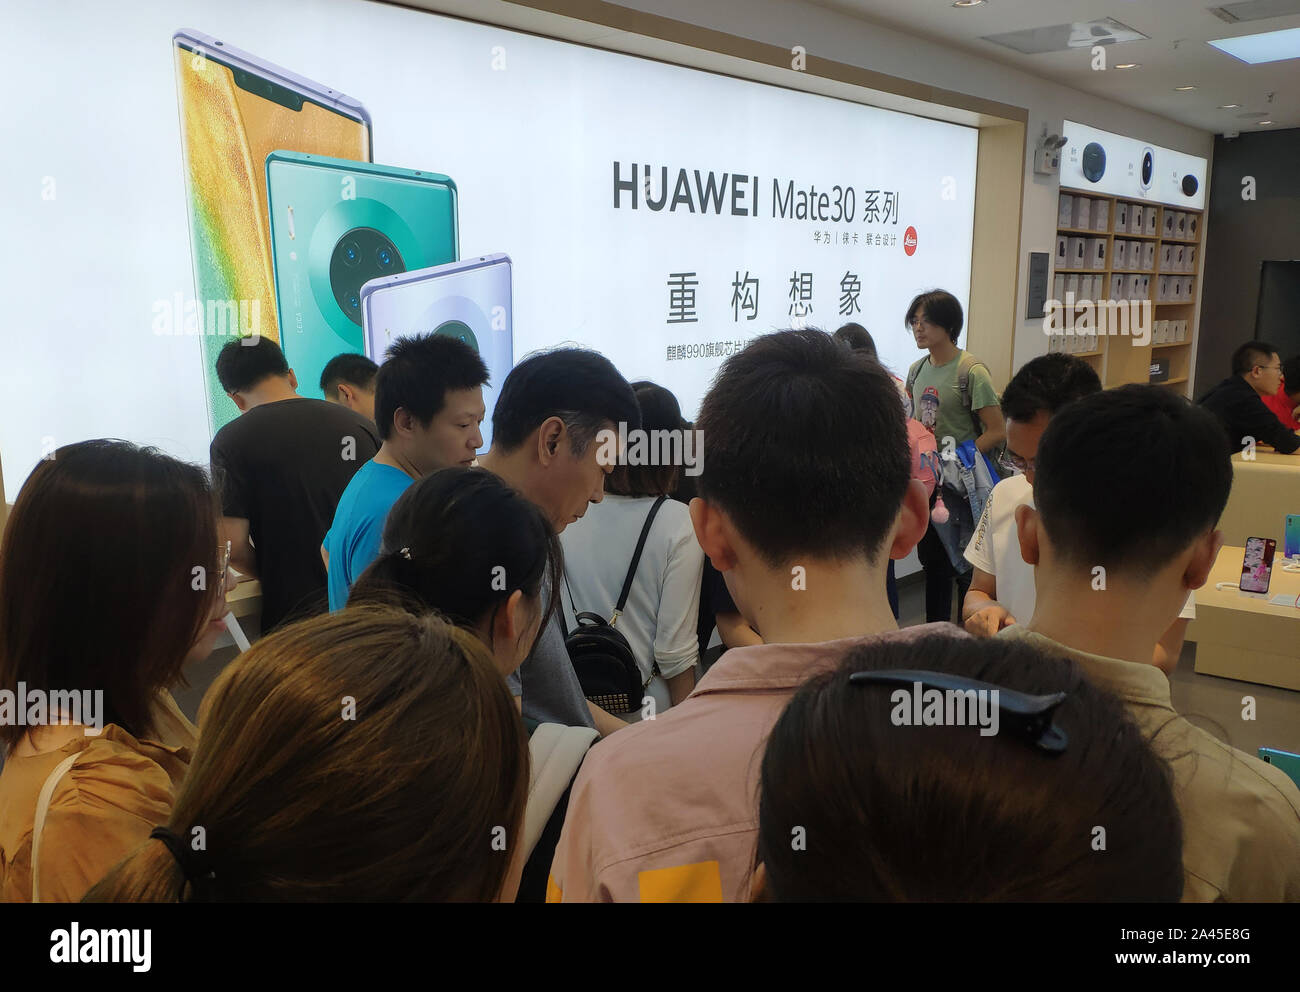 Enthusiastic consumers crowd into a retail store to experience newly-released Huawei Mate 30 series in Beijing, China, 23 September 2019. *** Local Ca Stock Photo